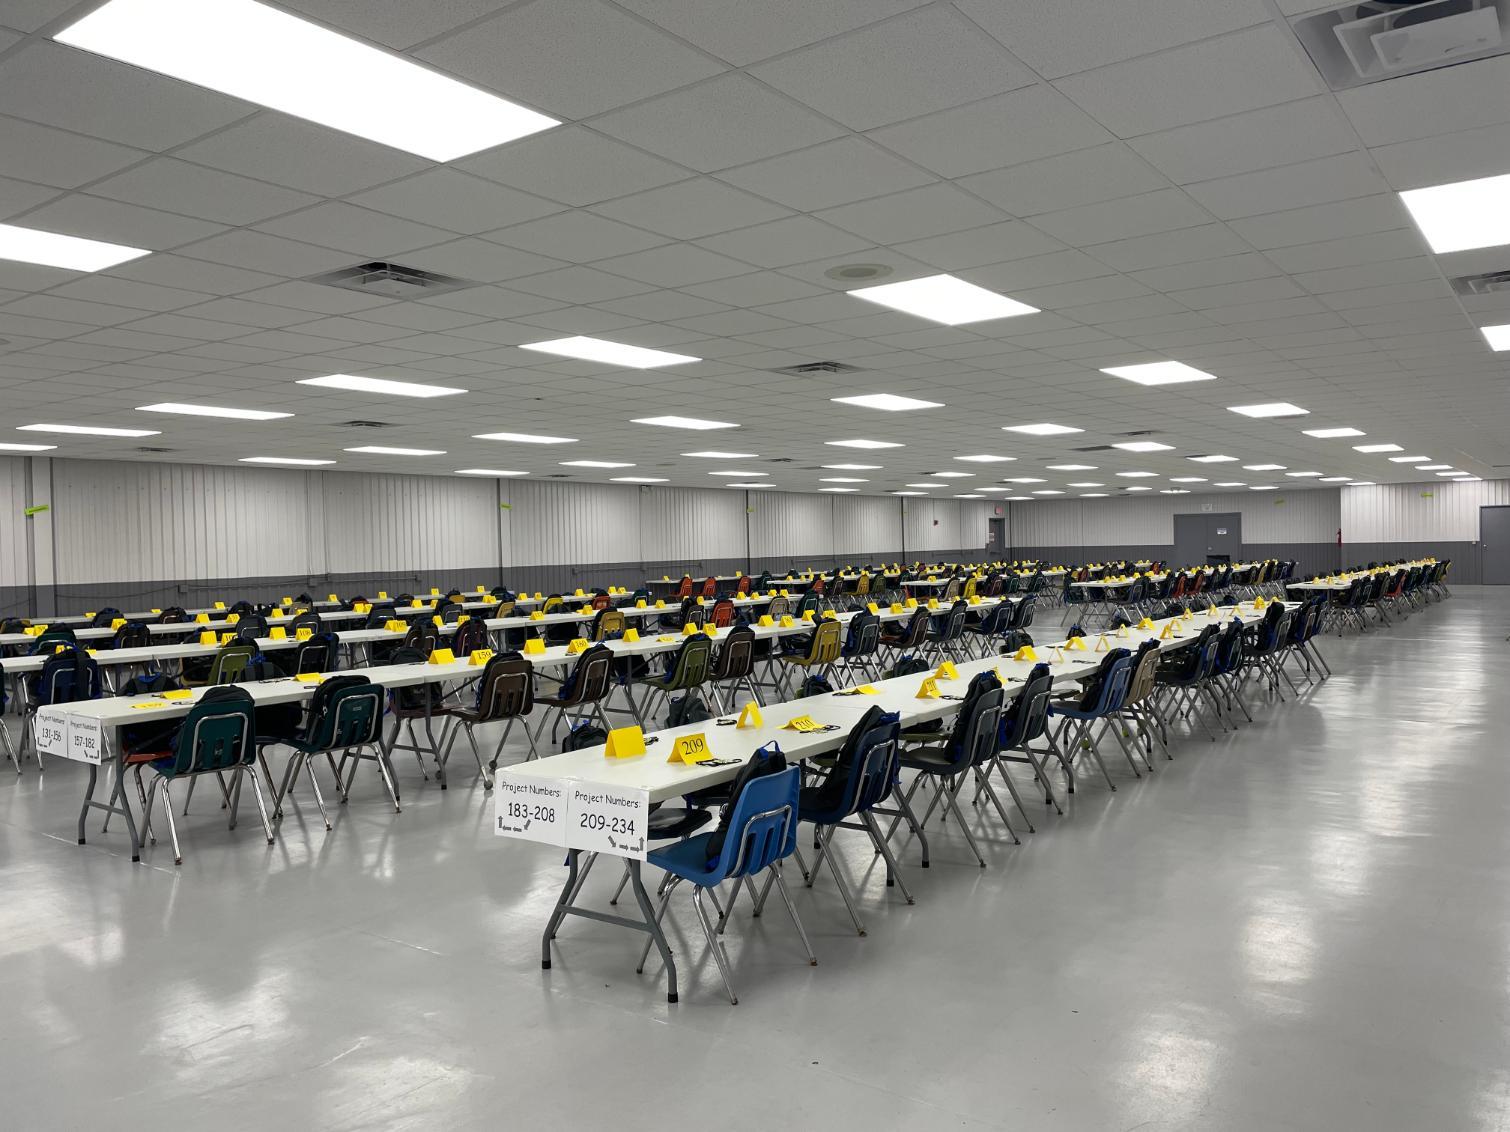 Photo of the tables and chairs set up in the building